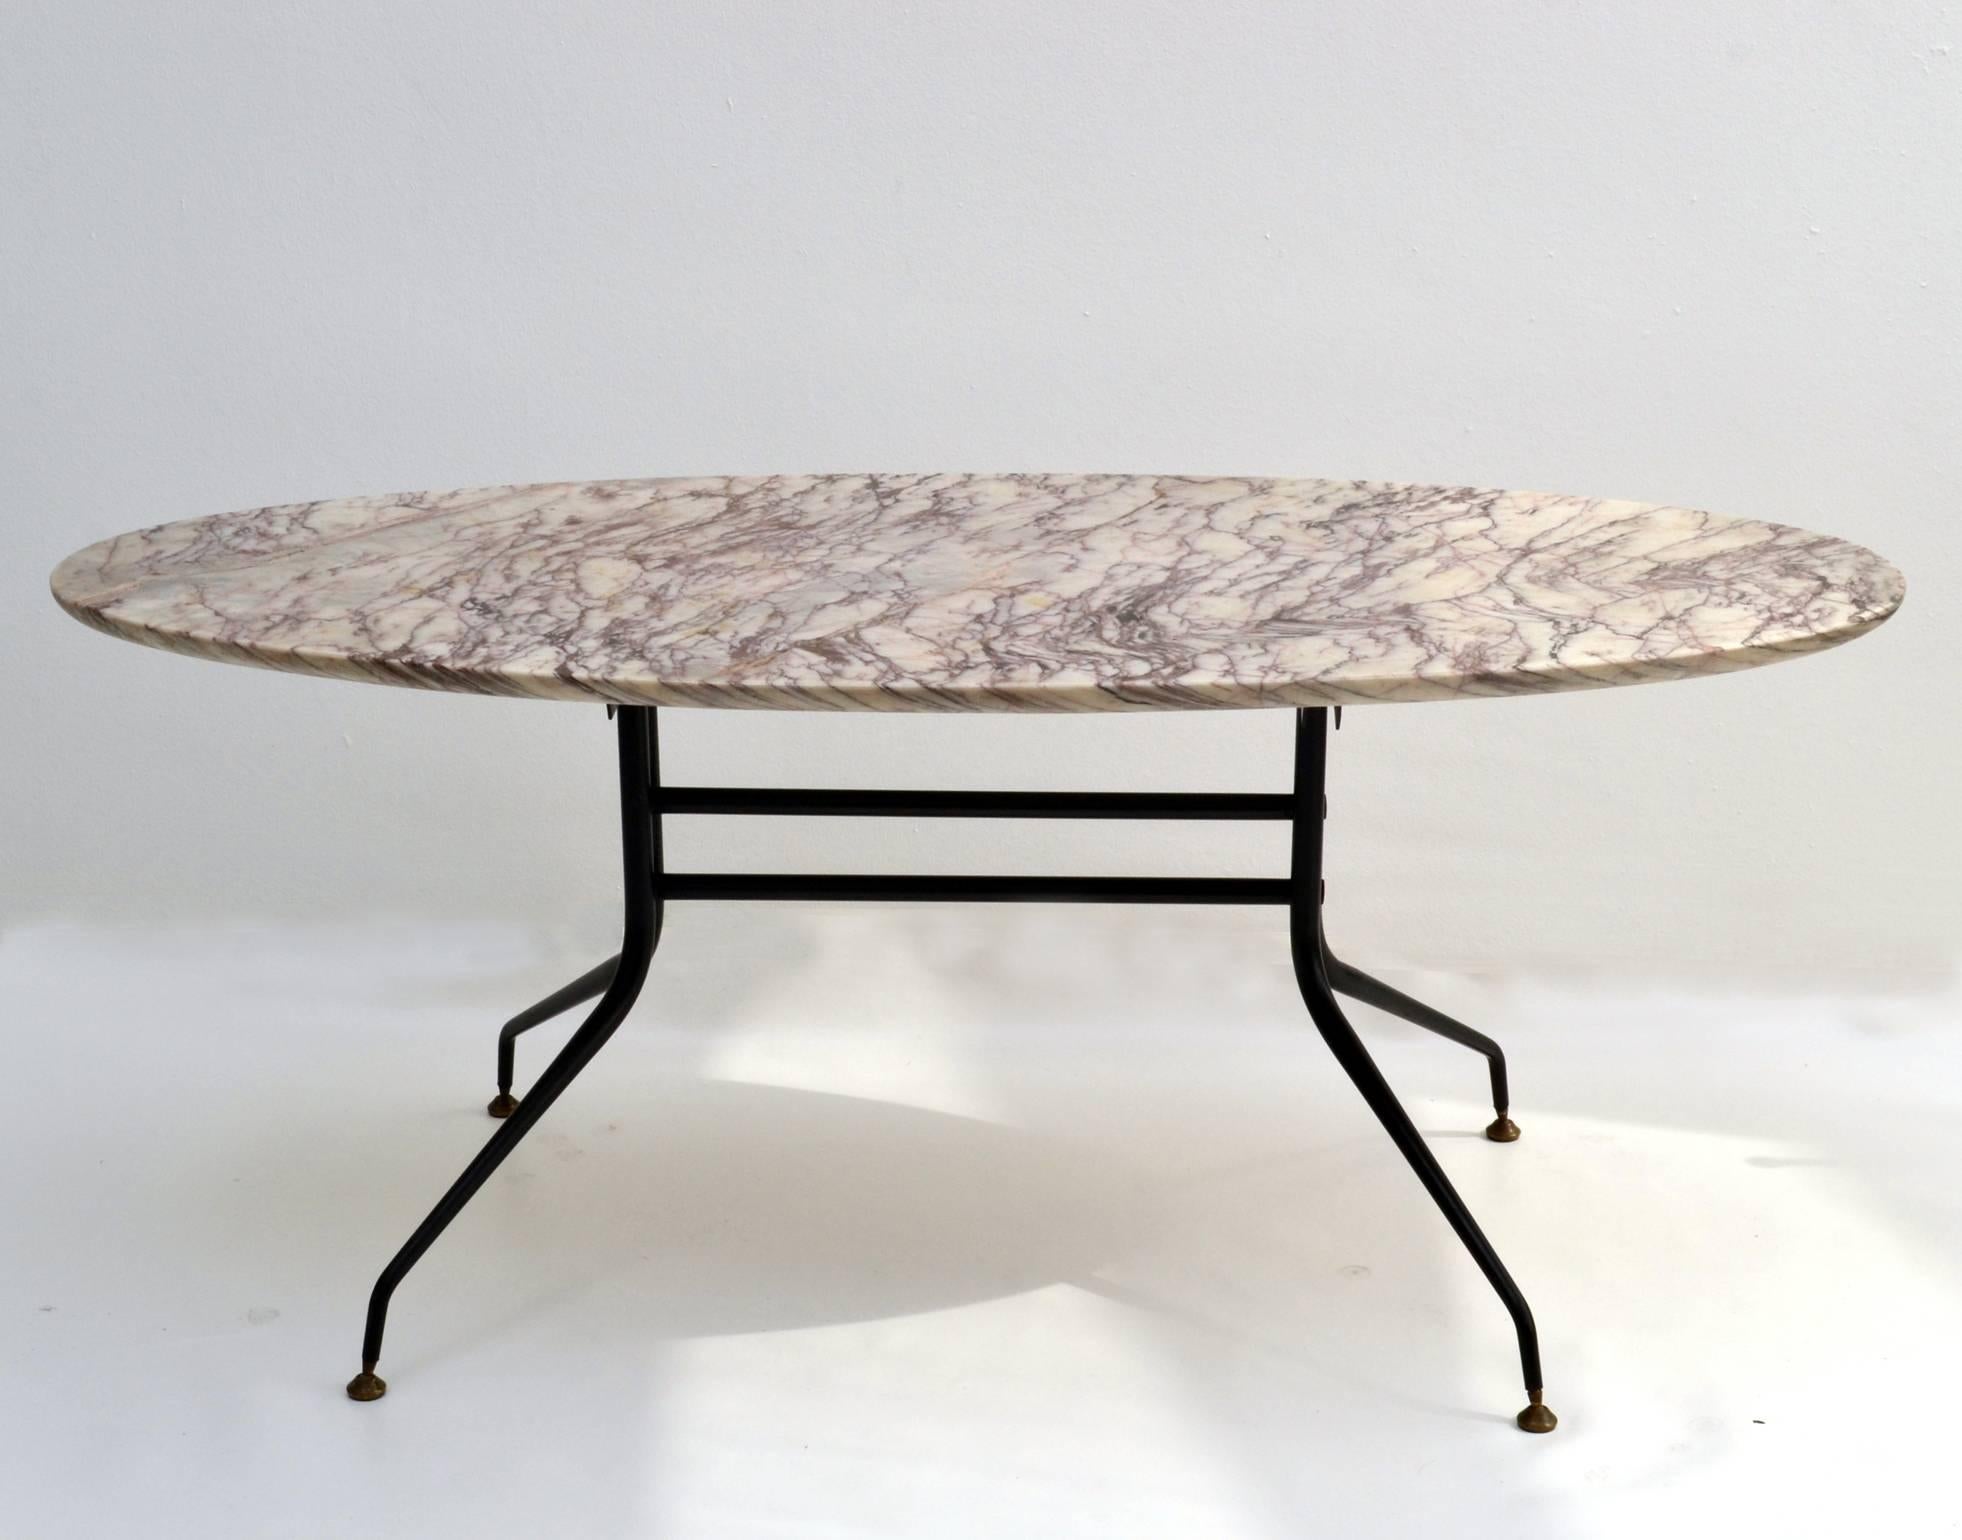 An exceptional 1950s Italian elliptical coffee table consisting of an long oval 'surfboard' shaped purple vein white marble top supported by elegant spider legs on brass feet.